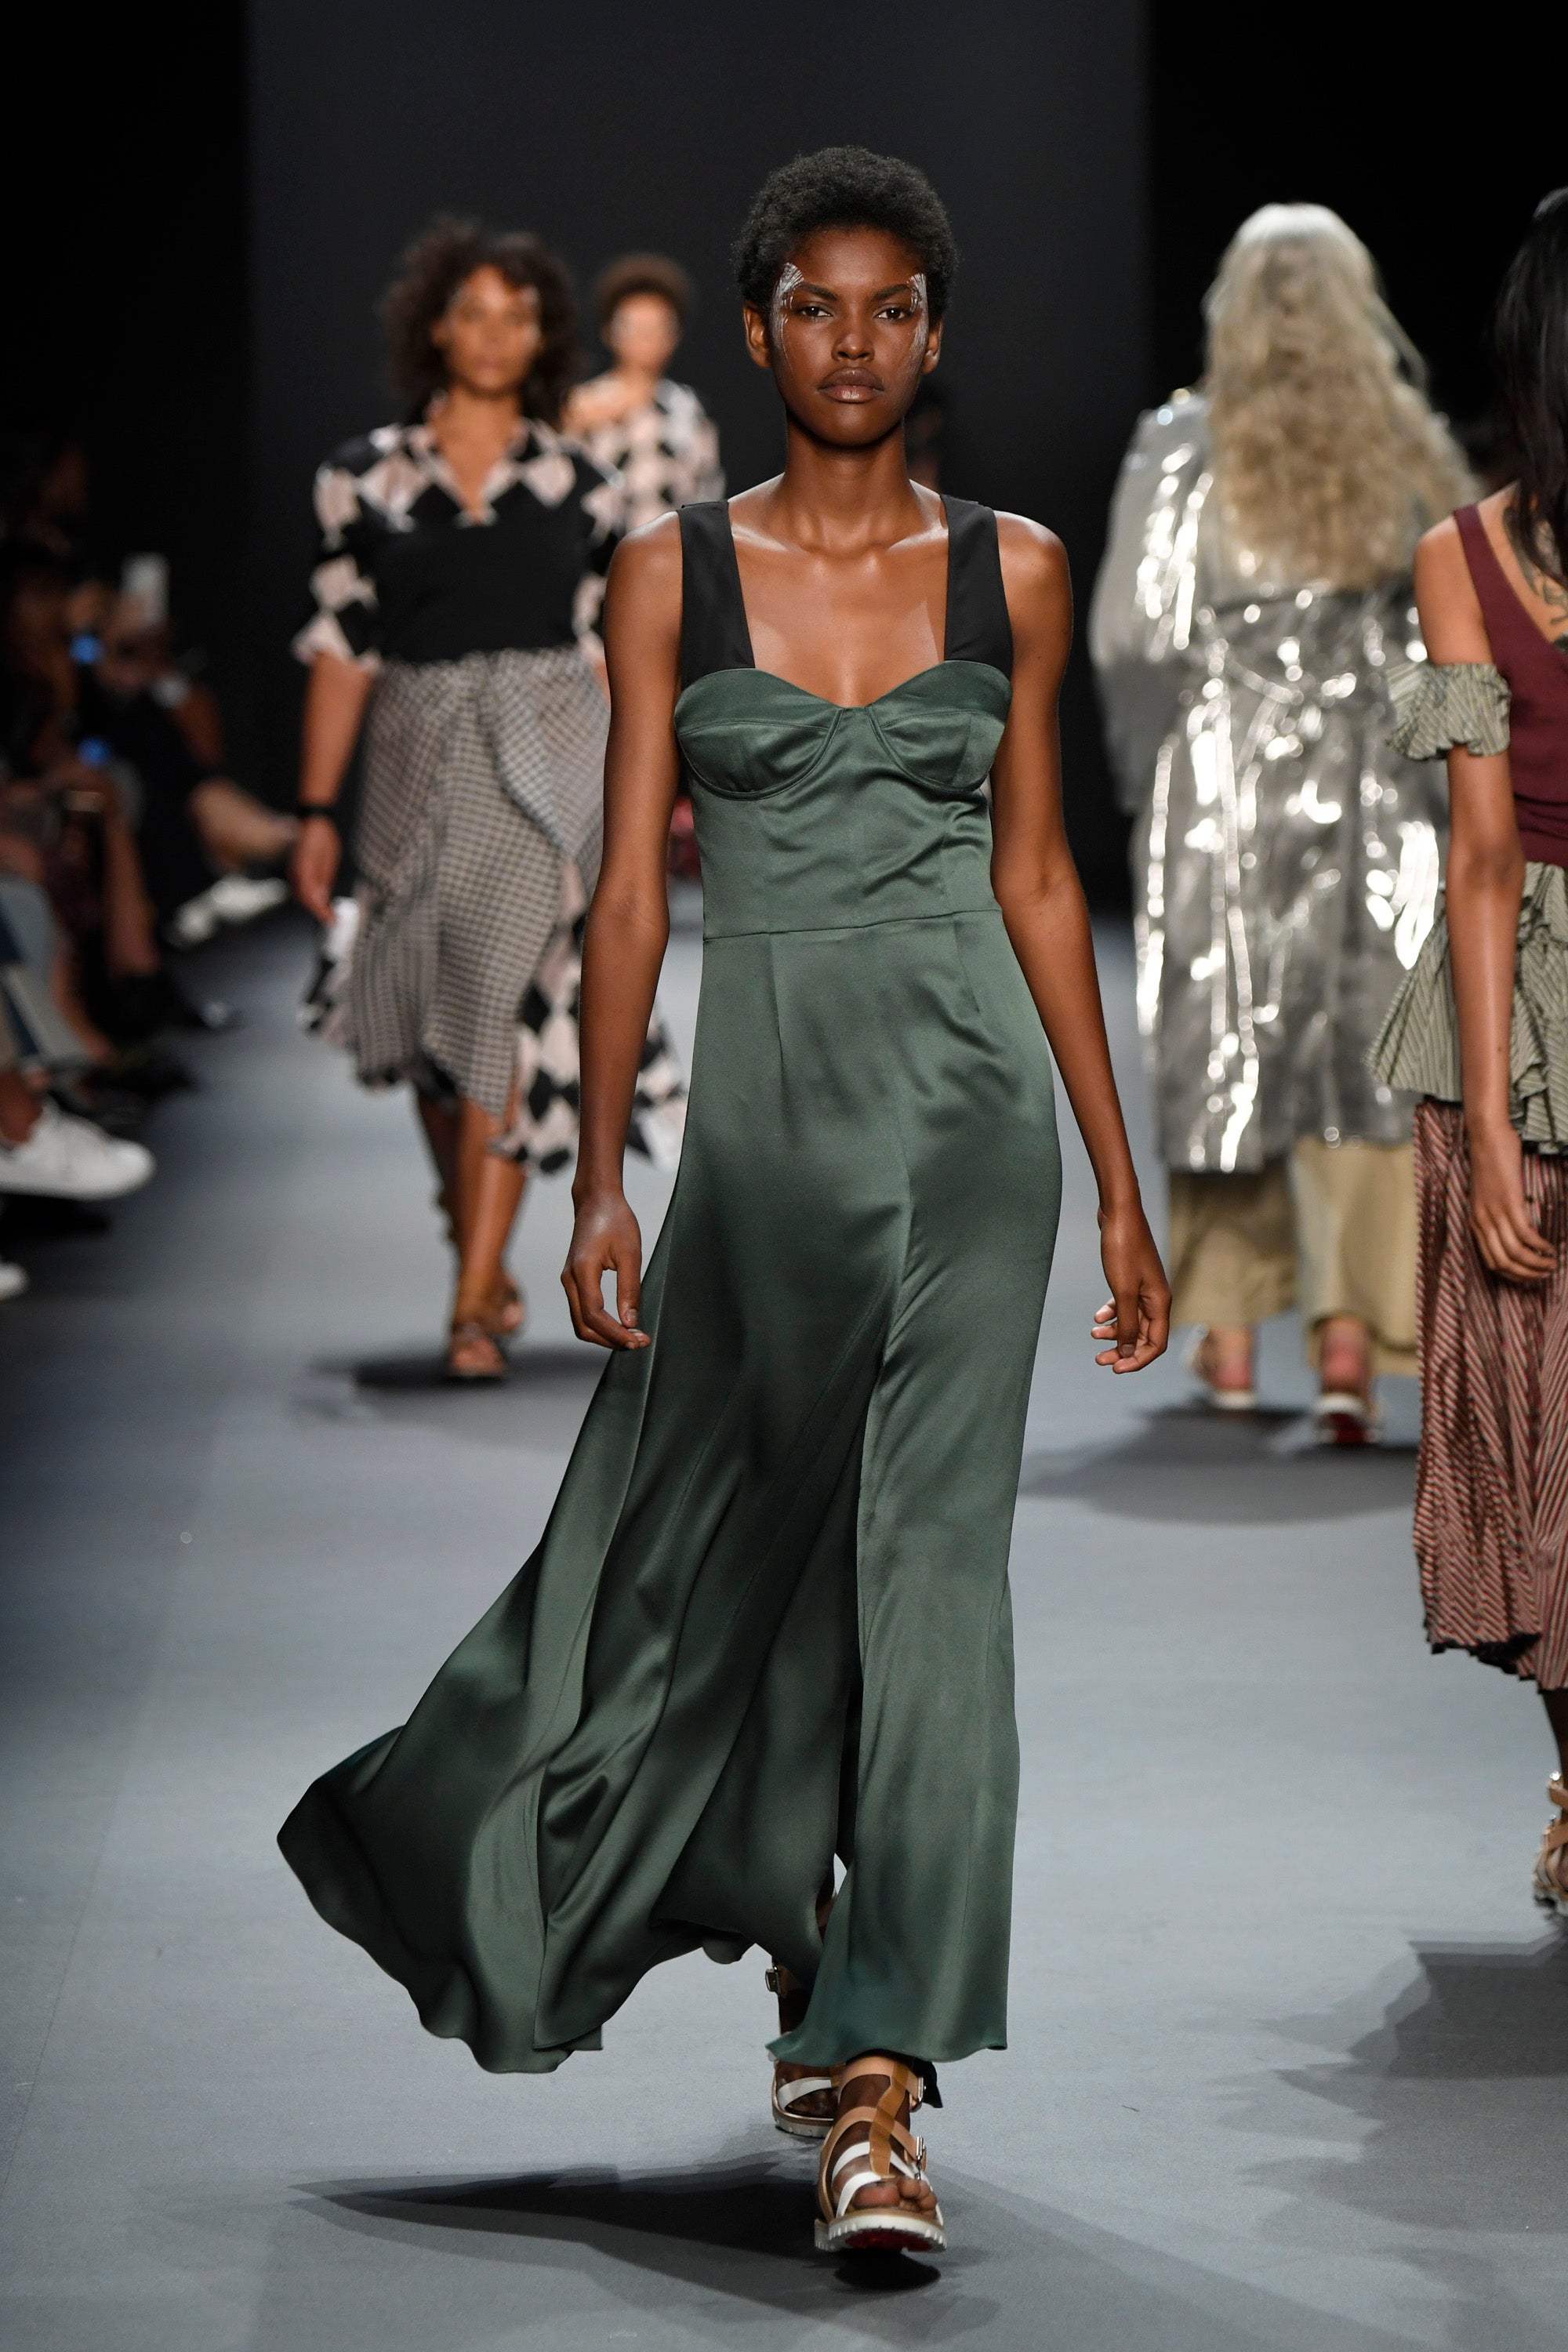 We Run This Town! All the Black Models at New York Fashion Week
